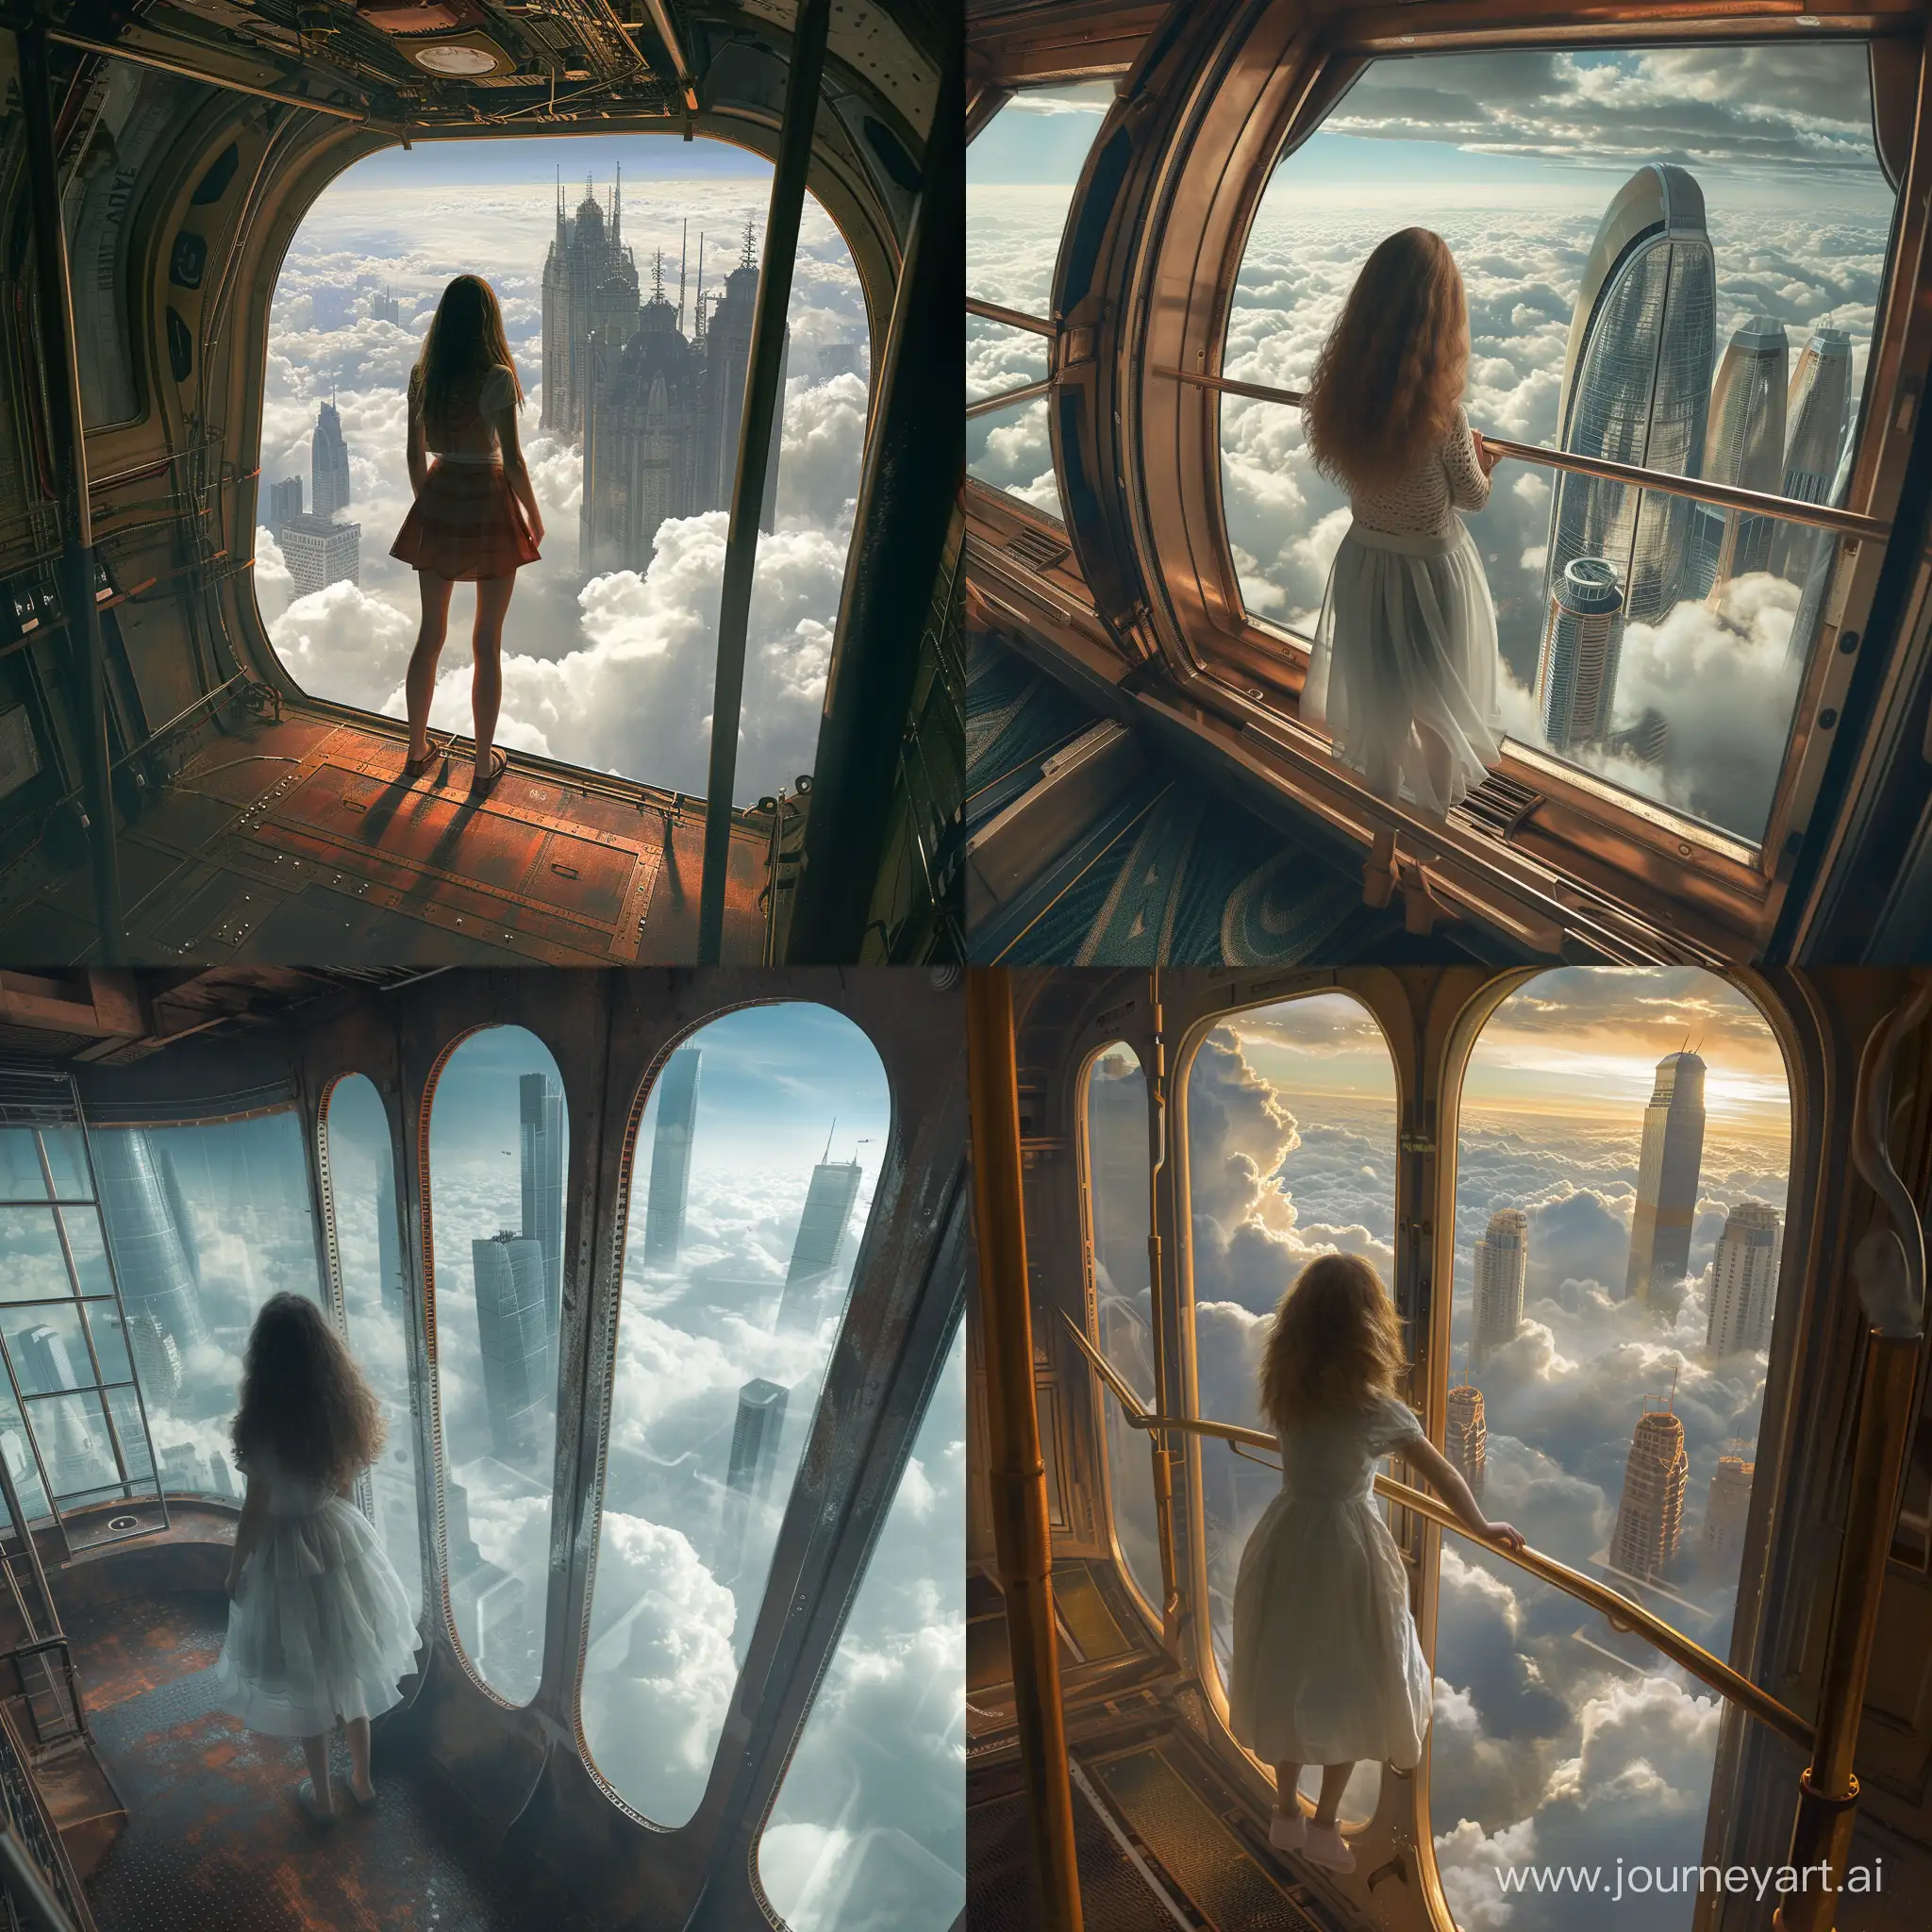 Adventurous-Girl-Riding-Monorail-Above-Clouds-with-Sovietstyle-Skyscrapers-in-View